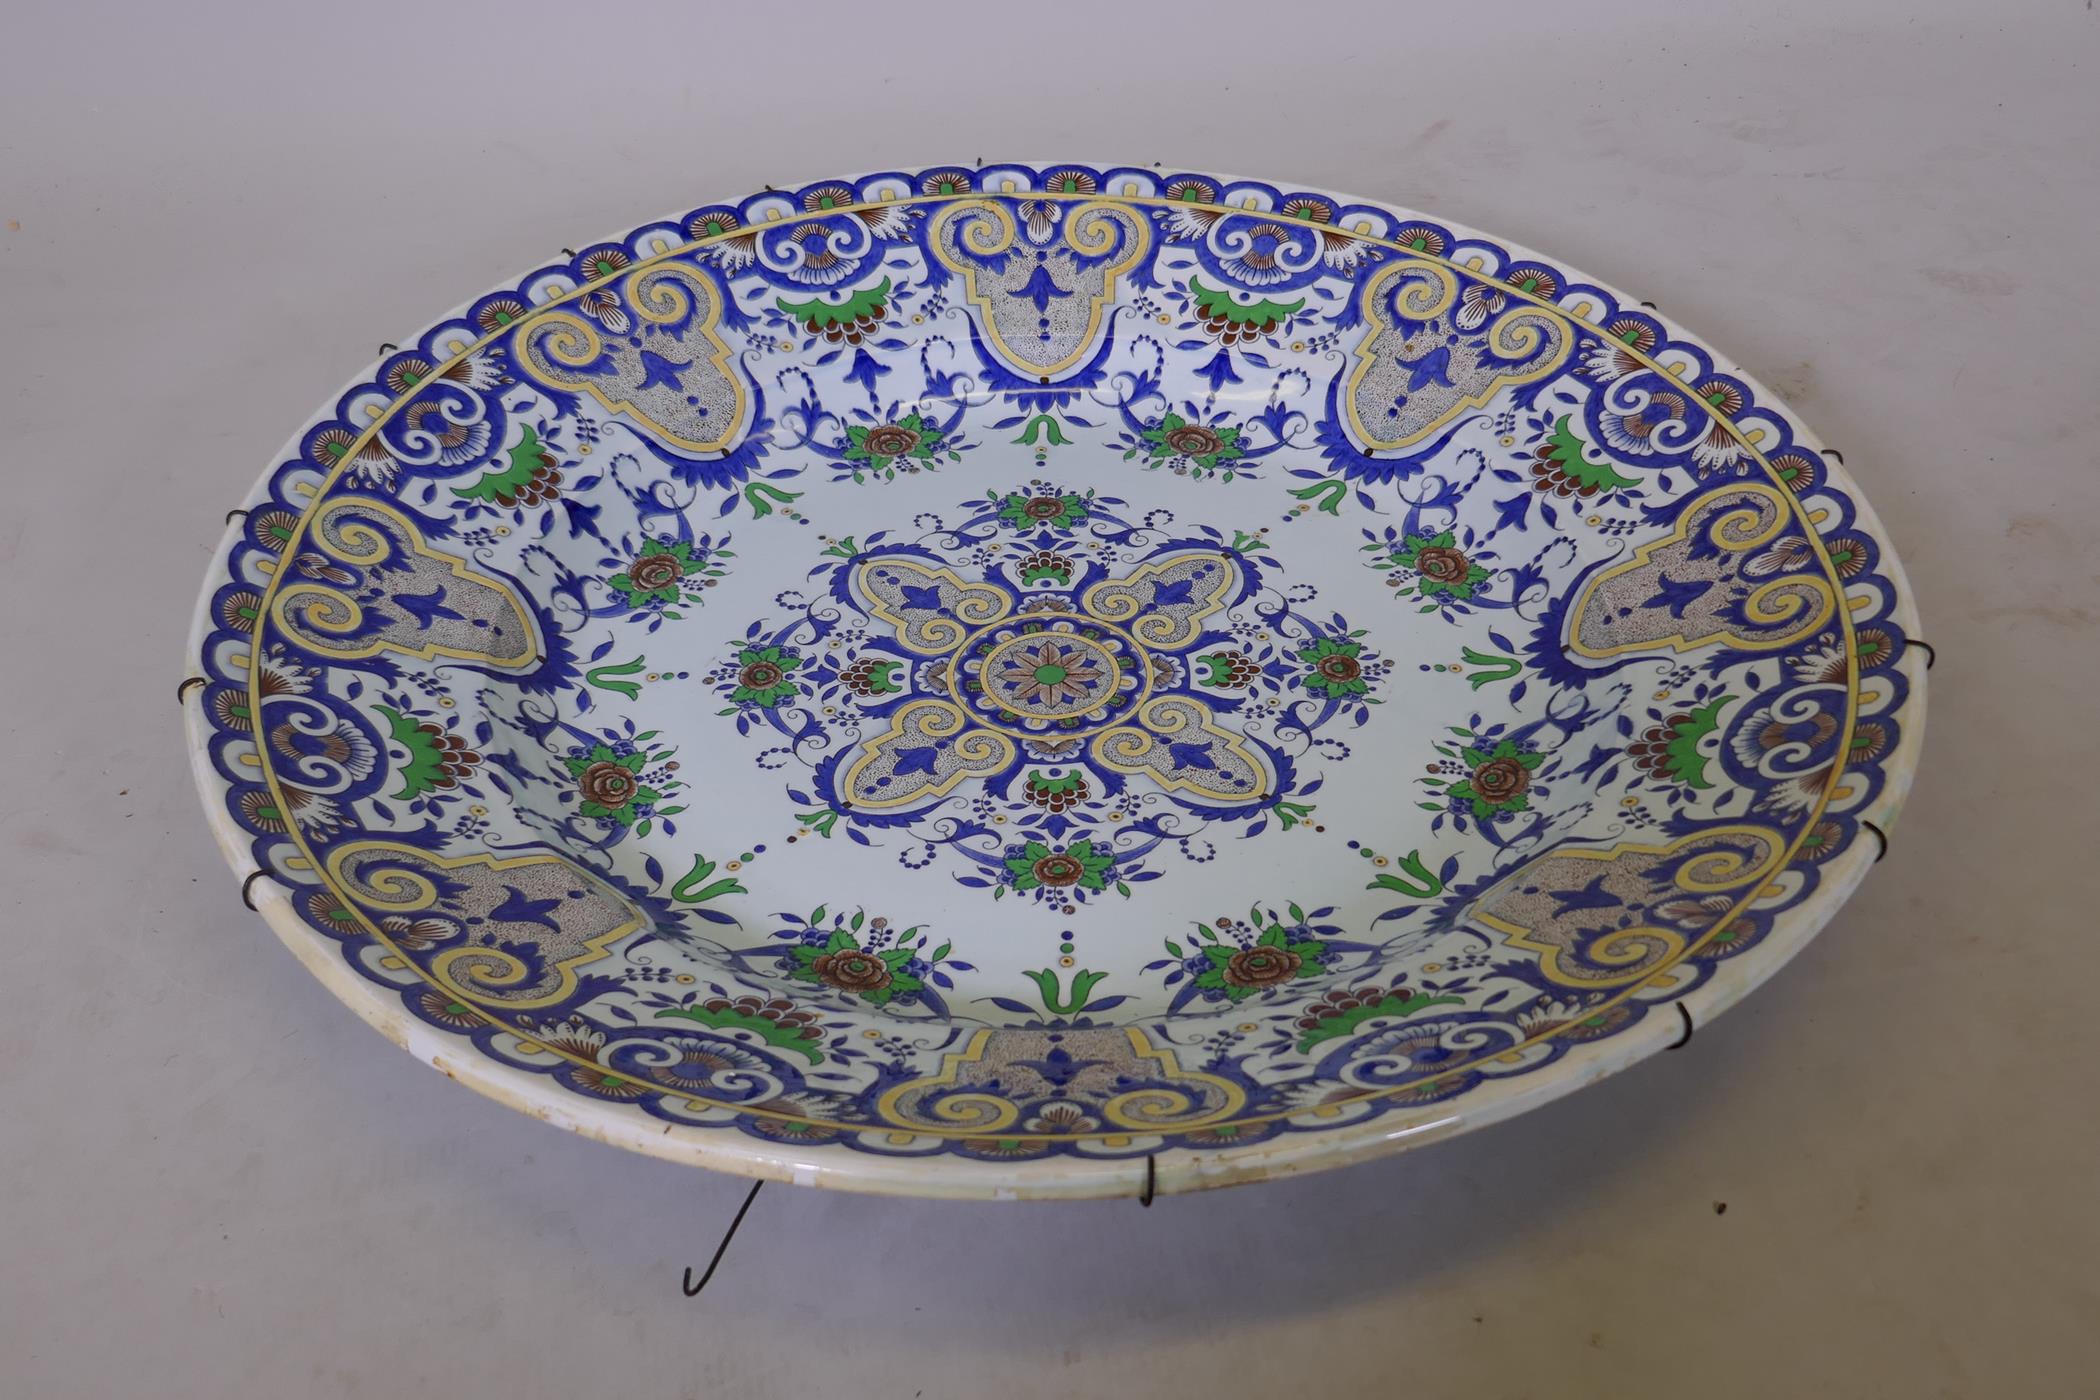 A large continental faience ceramic charger with oriental style decoration, 24" diameter - Image 2 of 3